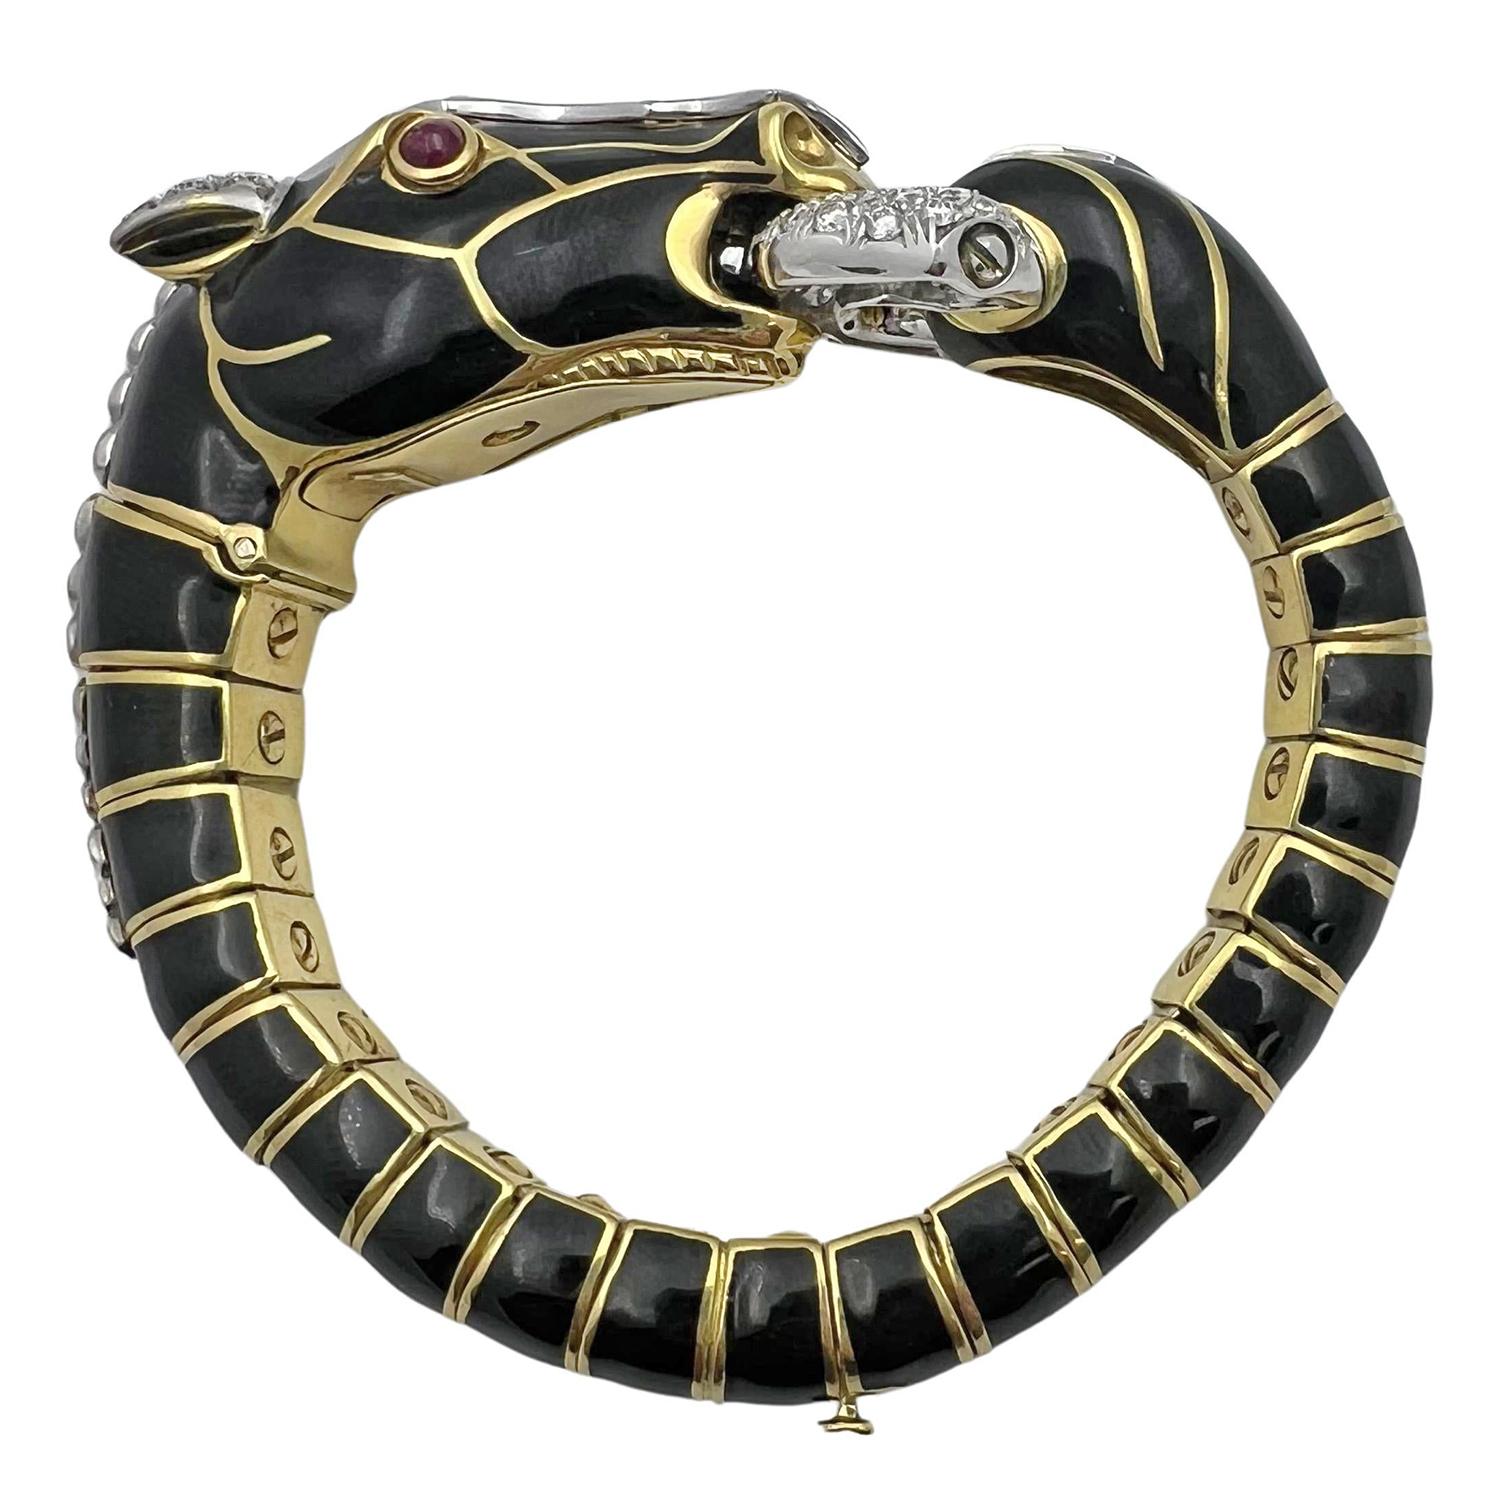 David Webb stylized horse bracelet, decorated in black enamel enhanced by pavé-set round diamonds at the center of the face, ears and bit, along with cabochon ruby eyes.  Handcrafted in 18k yellow gold and platinum.  Bangle is fully articulated with